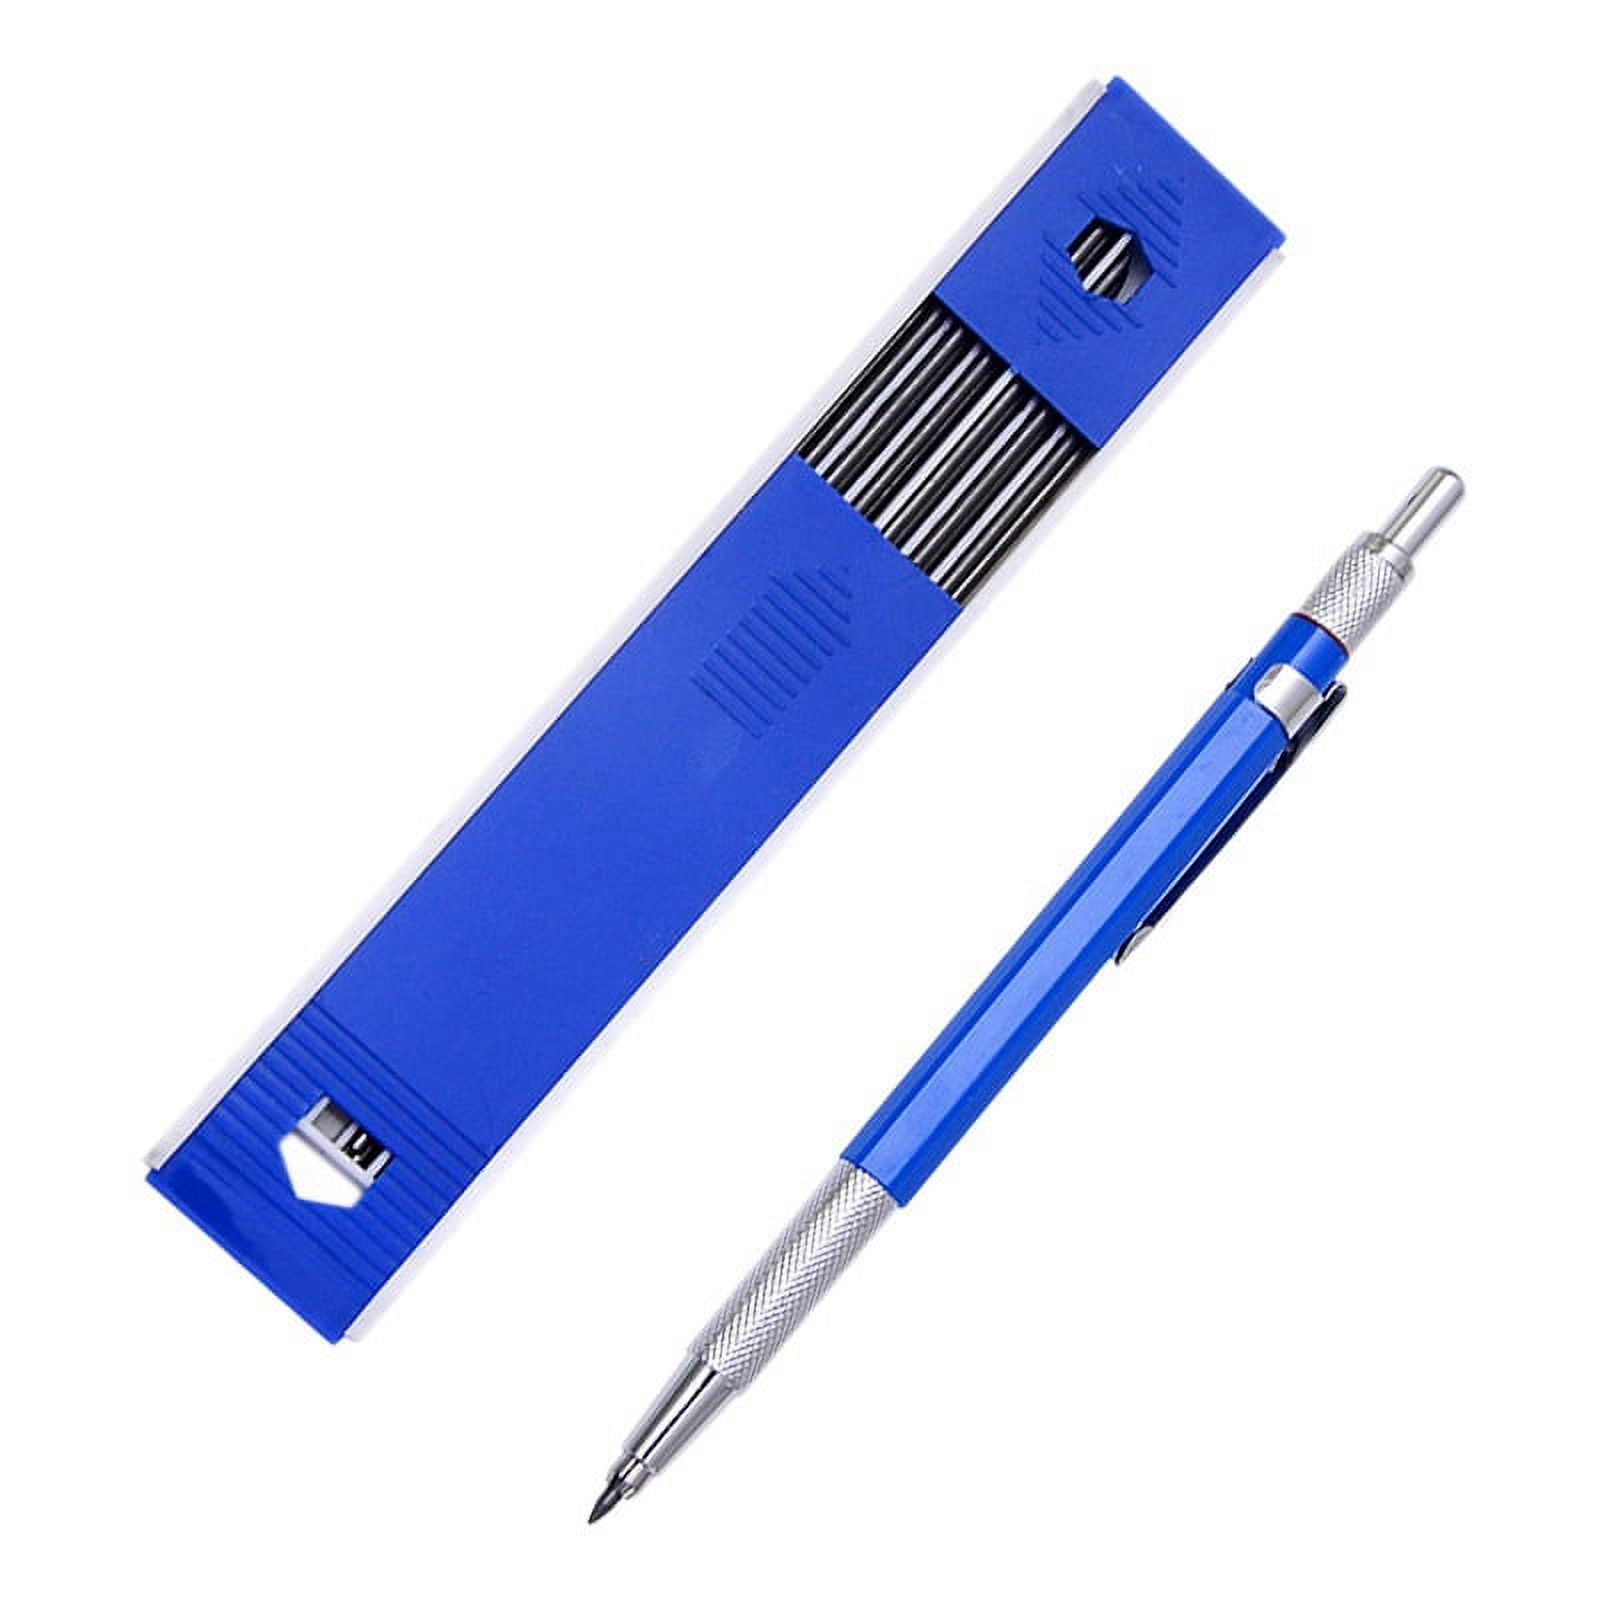 5.6 mm Diameter Mechanical Pencil Artist Carpenter Drafting Pencils Come  with Pencil Refills Metal Marker with Built Sharpener for Construction